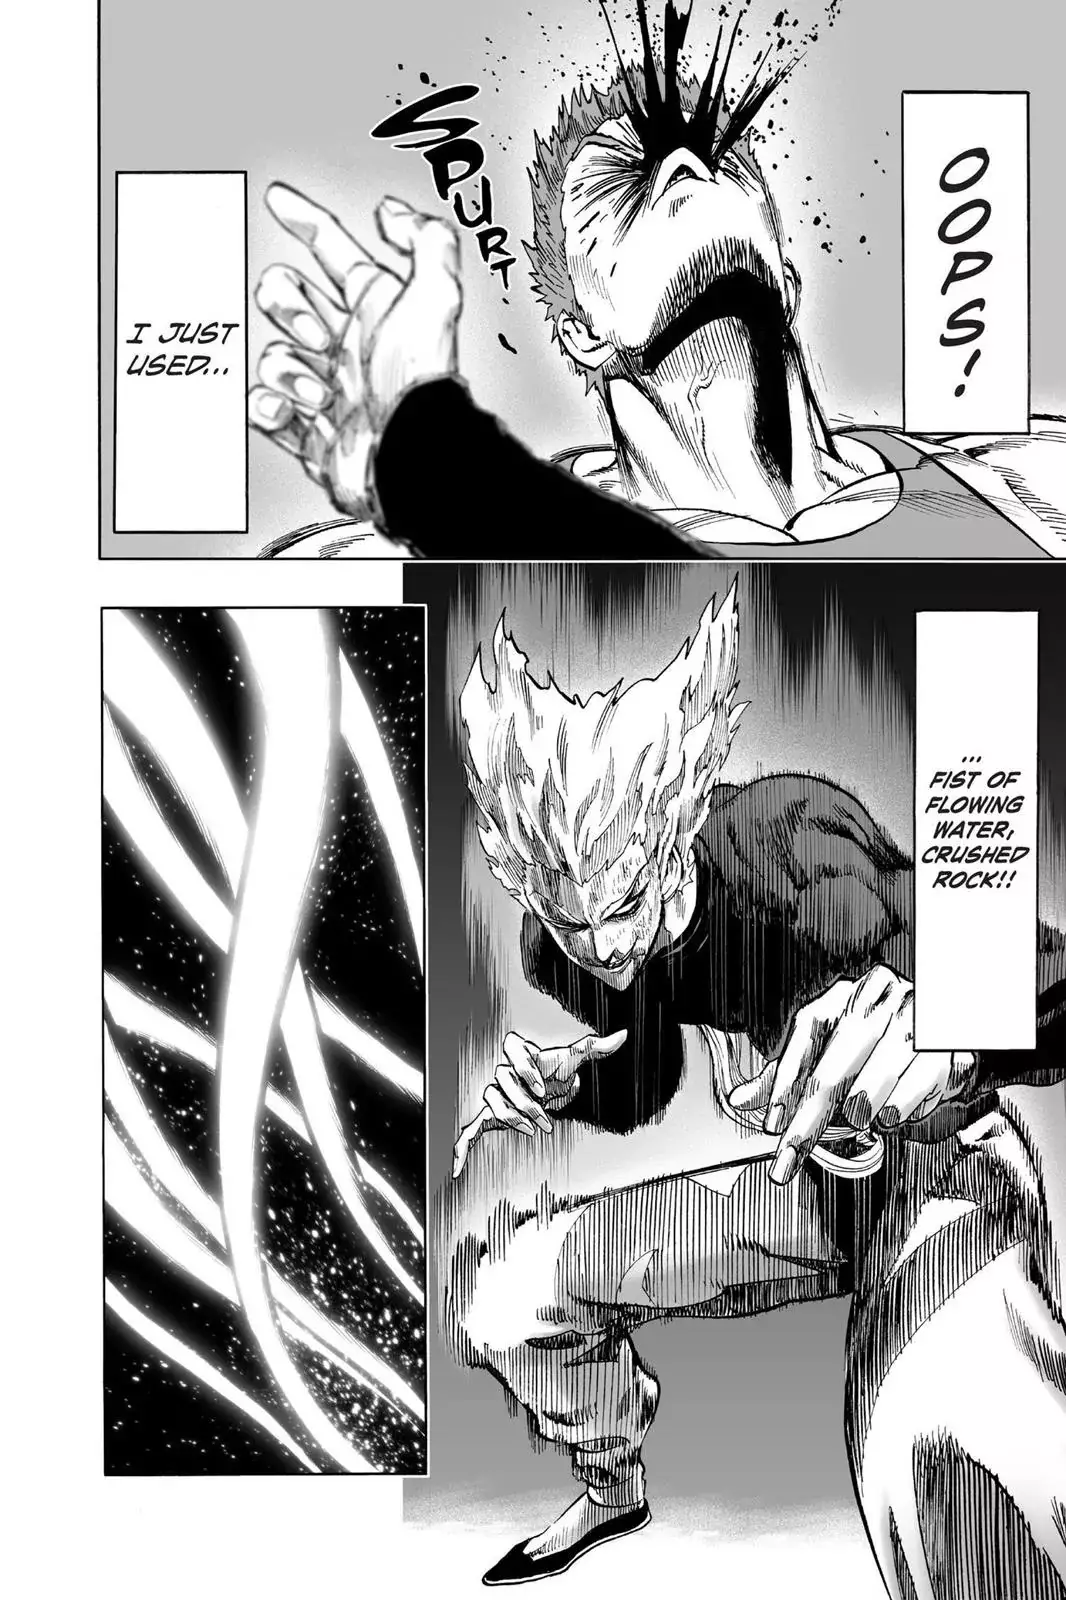 One Punch Man Chapter 47, READ One Punch Man Chapter 47 ONLINE, lost in the cloud genre,lost in the cloud gif,lost in the cloud girl,lost in the cloud goods,lost in the cloud goodreads,lost in the cloud,lost ark cloud gaming,lost odyssey cloud gaming,lost in the cloud fanart,lost in the cloud fanfic,lost in the cloud fandom,lost in the cloud first kiss,lost in the cloud font,lost in the cloud ending,lost in the cloud episode 97,lost in the cloud edit,lost in the cloud explained,lost in the cloud dog,lost in the cloud discord server,lost in the cloud desktop wallpaper,lost in the cloud drawing,can't find my cloud on network,lost in the cloud characters,lost in the cloud chapter 93 release date,lost in the cloud birthday,lost in the cloud birthday art,lost in the cloud background,lost in the cloud banner,lost in the clouds meaning,what is the black cloud in lost,lost in the cloud ao3,lost in the cloud anime,lost in the cloud art,lost in the cloud author twitter,lost in the cloud author instagram,lost in the cloud artist,lost in the cloud acrylic stand,lost in the cloud artist twitter,lost in the cloud art style,lost in the cloud analysis